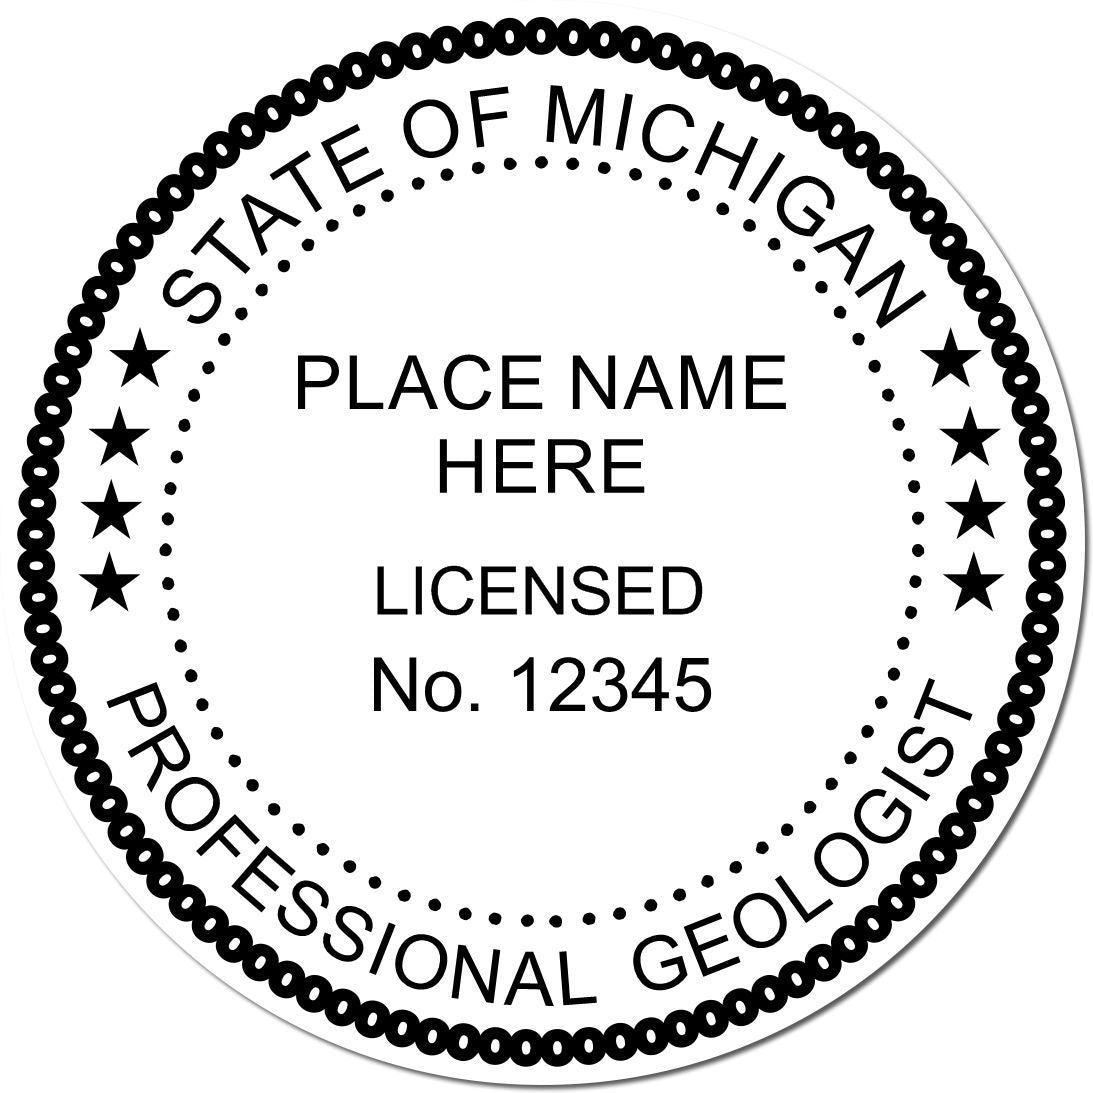 An alternative view of the Premium MaxLight Pre-Inked Michigan Geology Stamp stamped on a sheet of paper showing the image in use